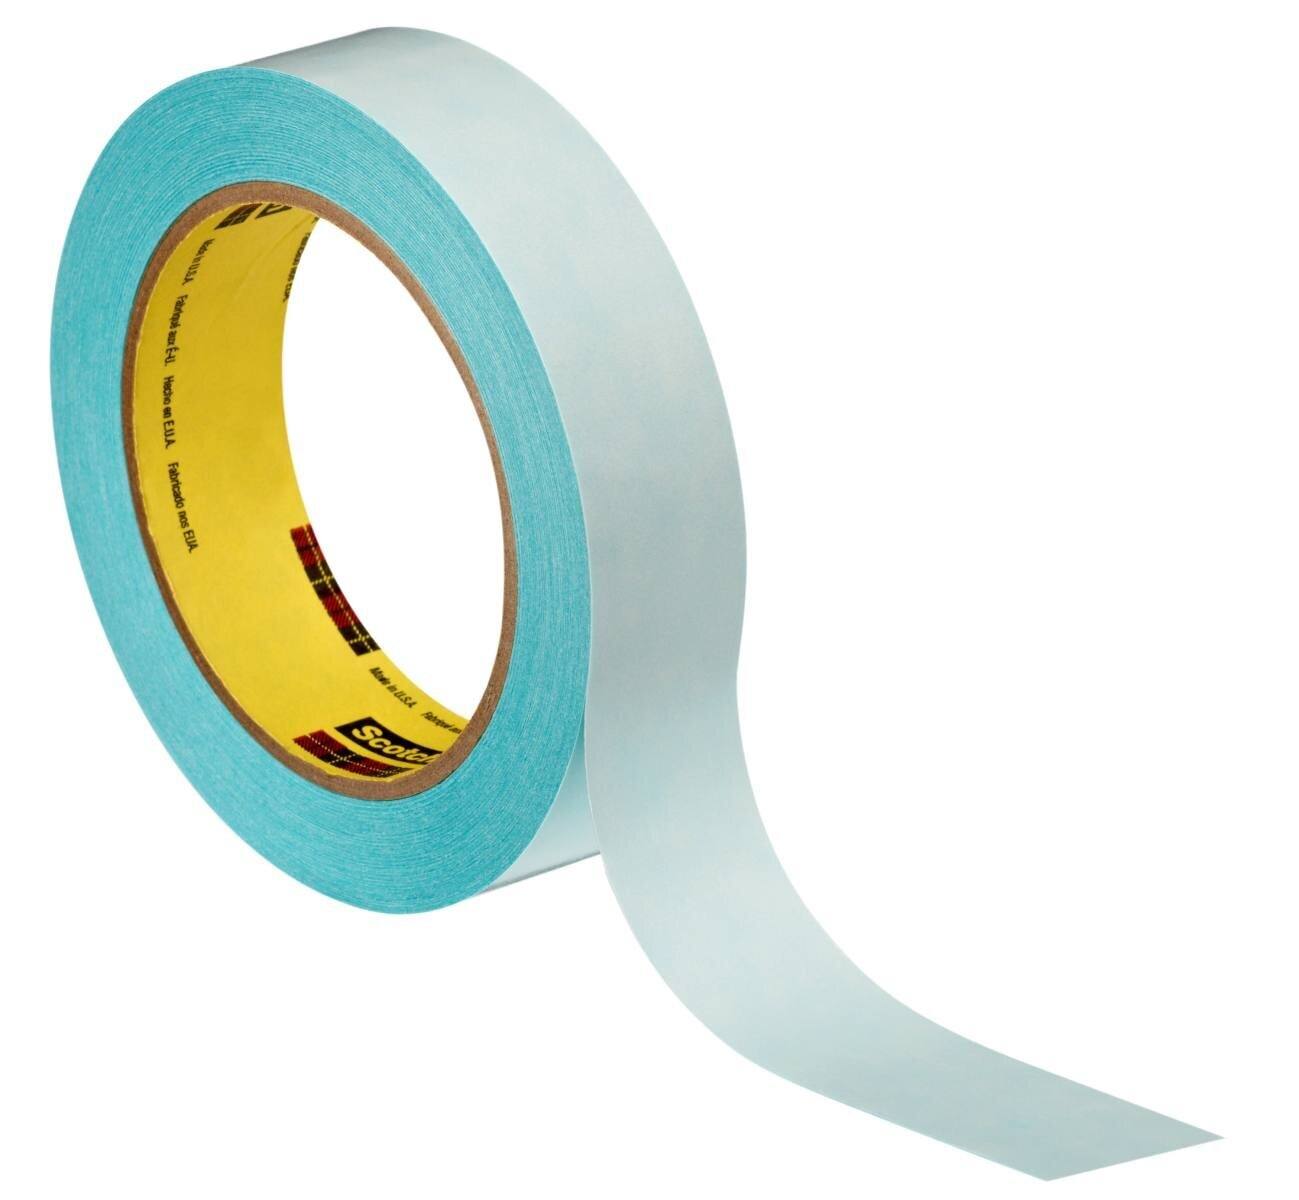 3M double-sided adhesive tape 906W, white, 25 mm x 50 m, 0.08 mm